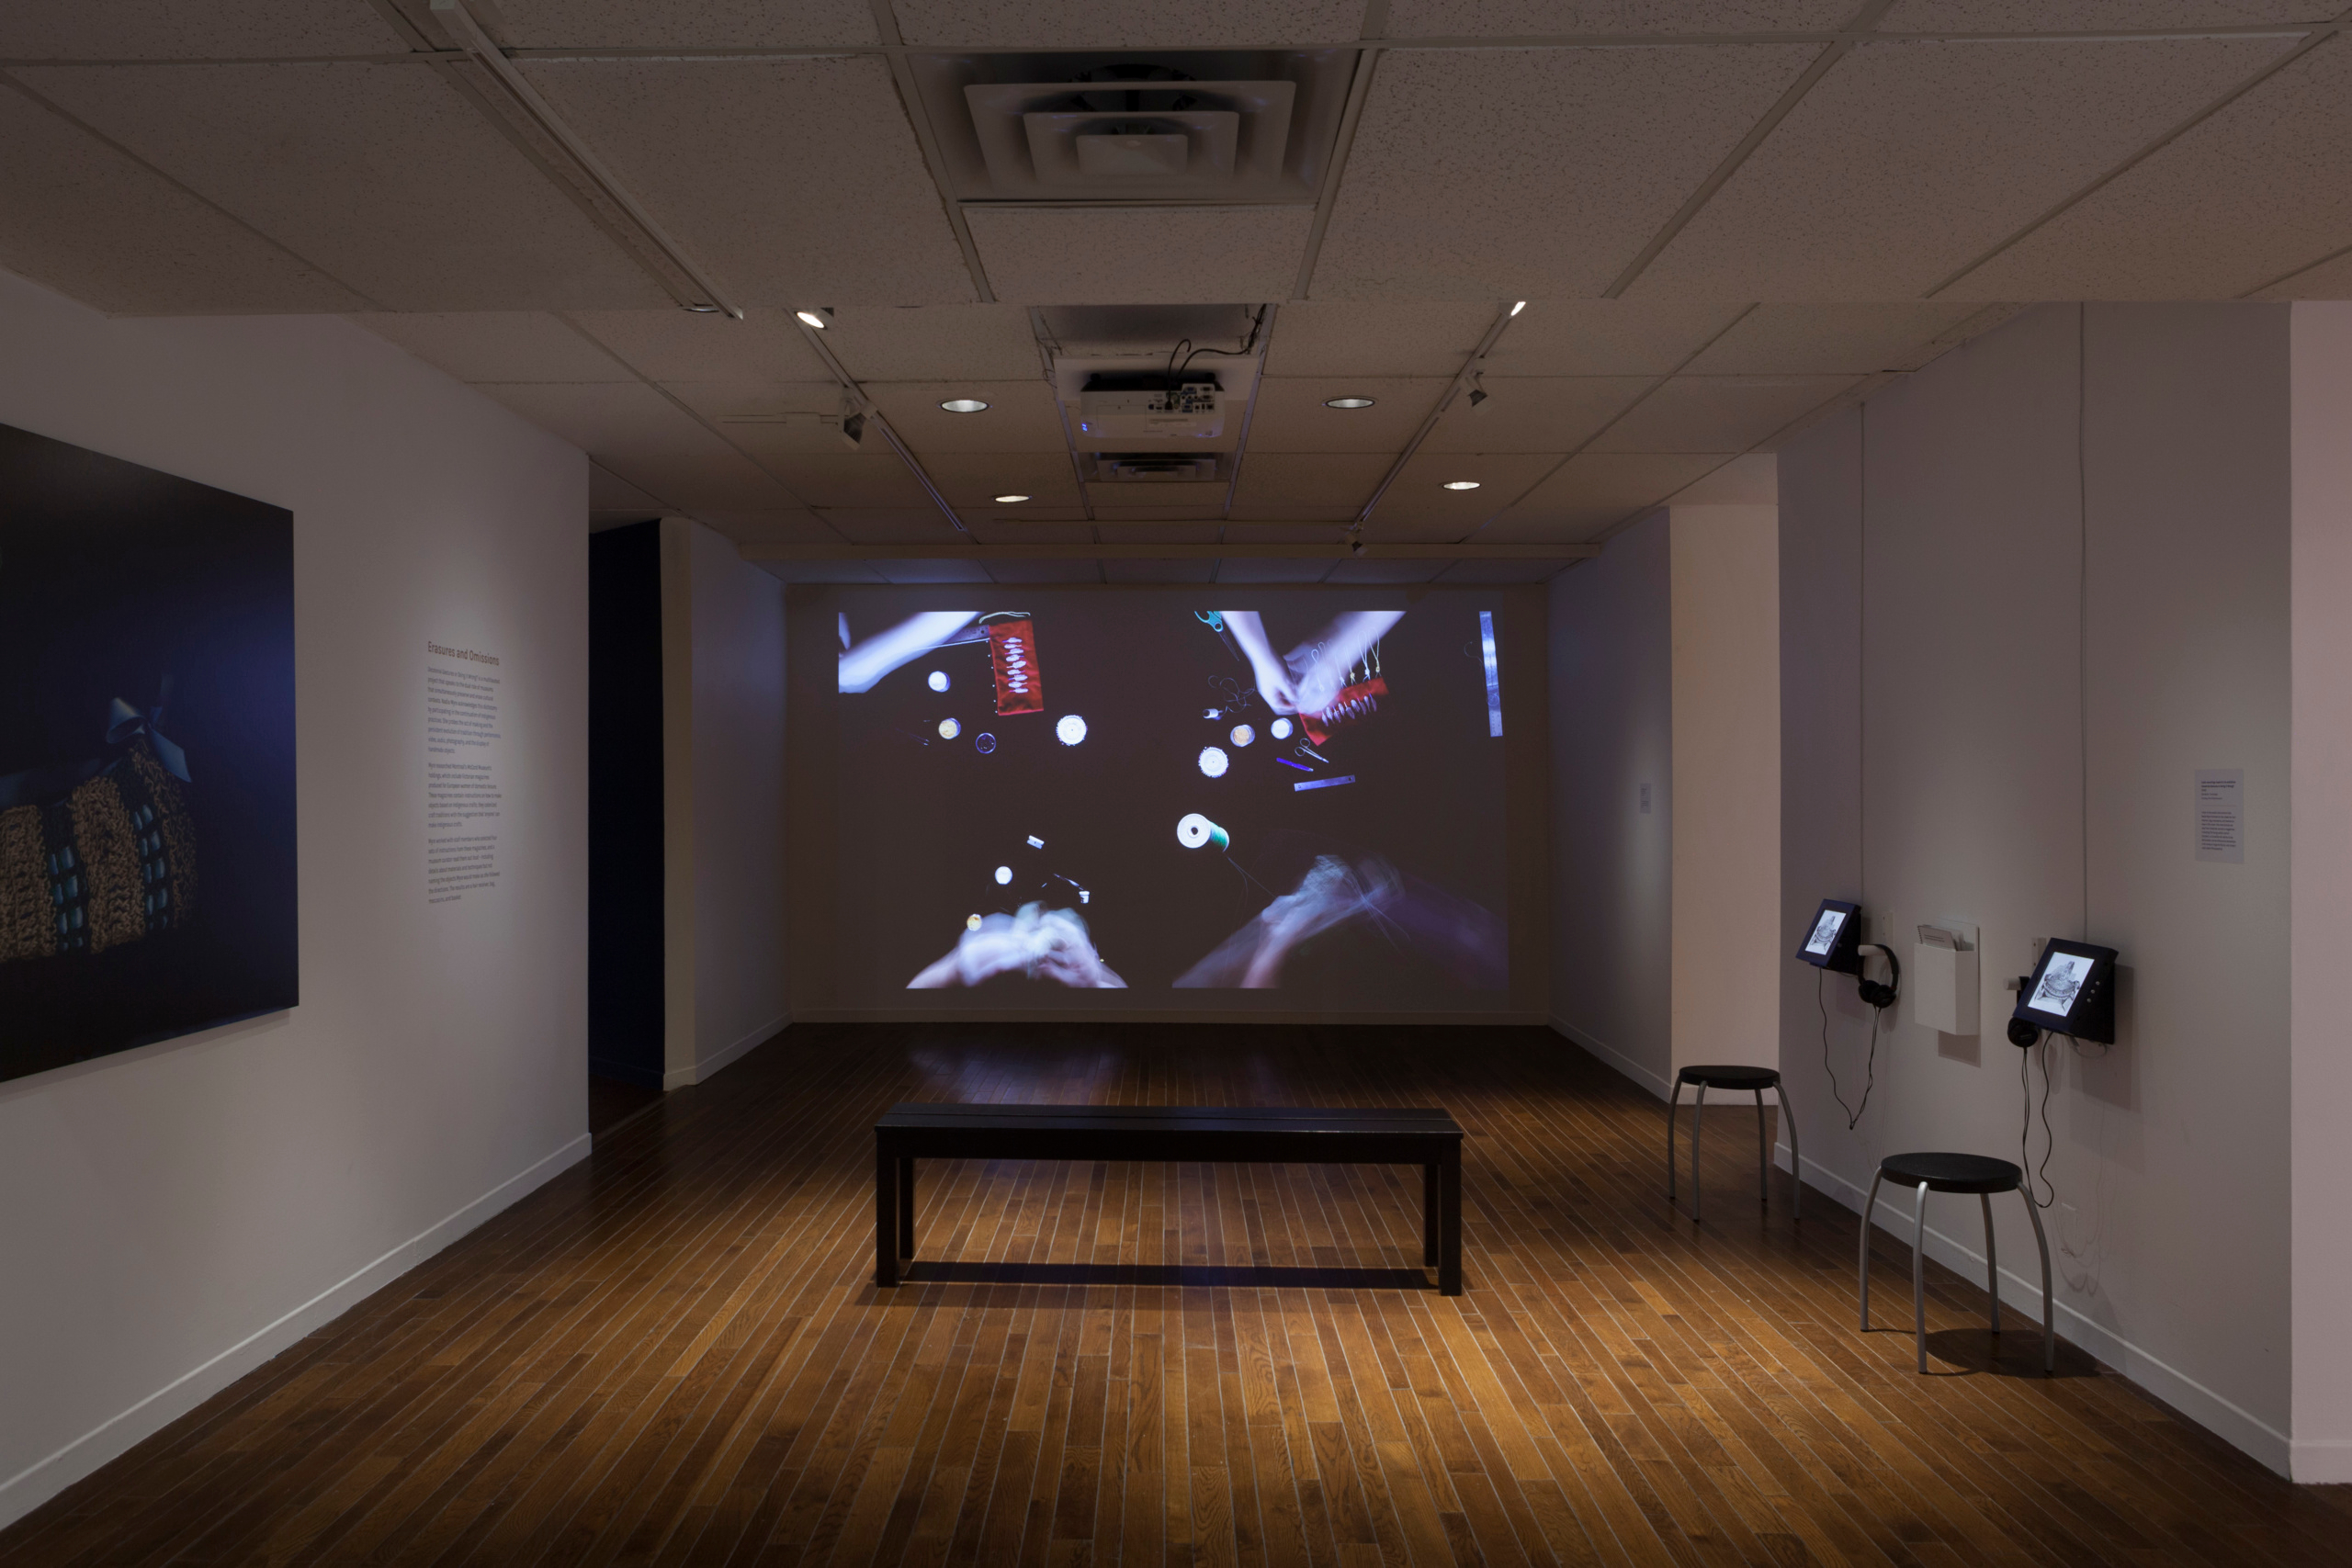     Installation view, Nadia Myre, Balancing Acts, Photo: Darren Rigo. Courtesy of the Textile Museum of Canada. 

